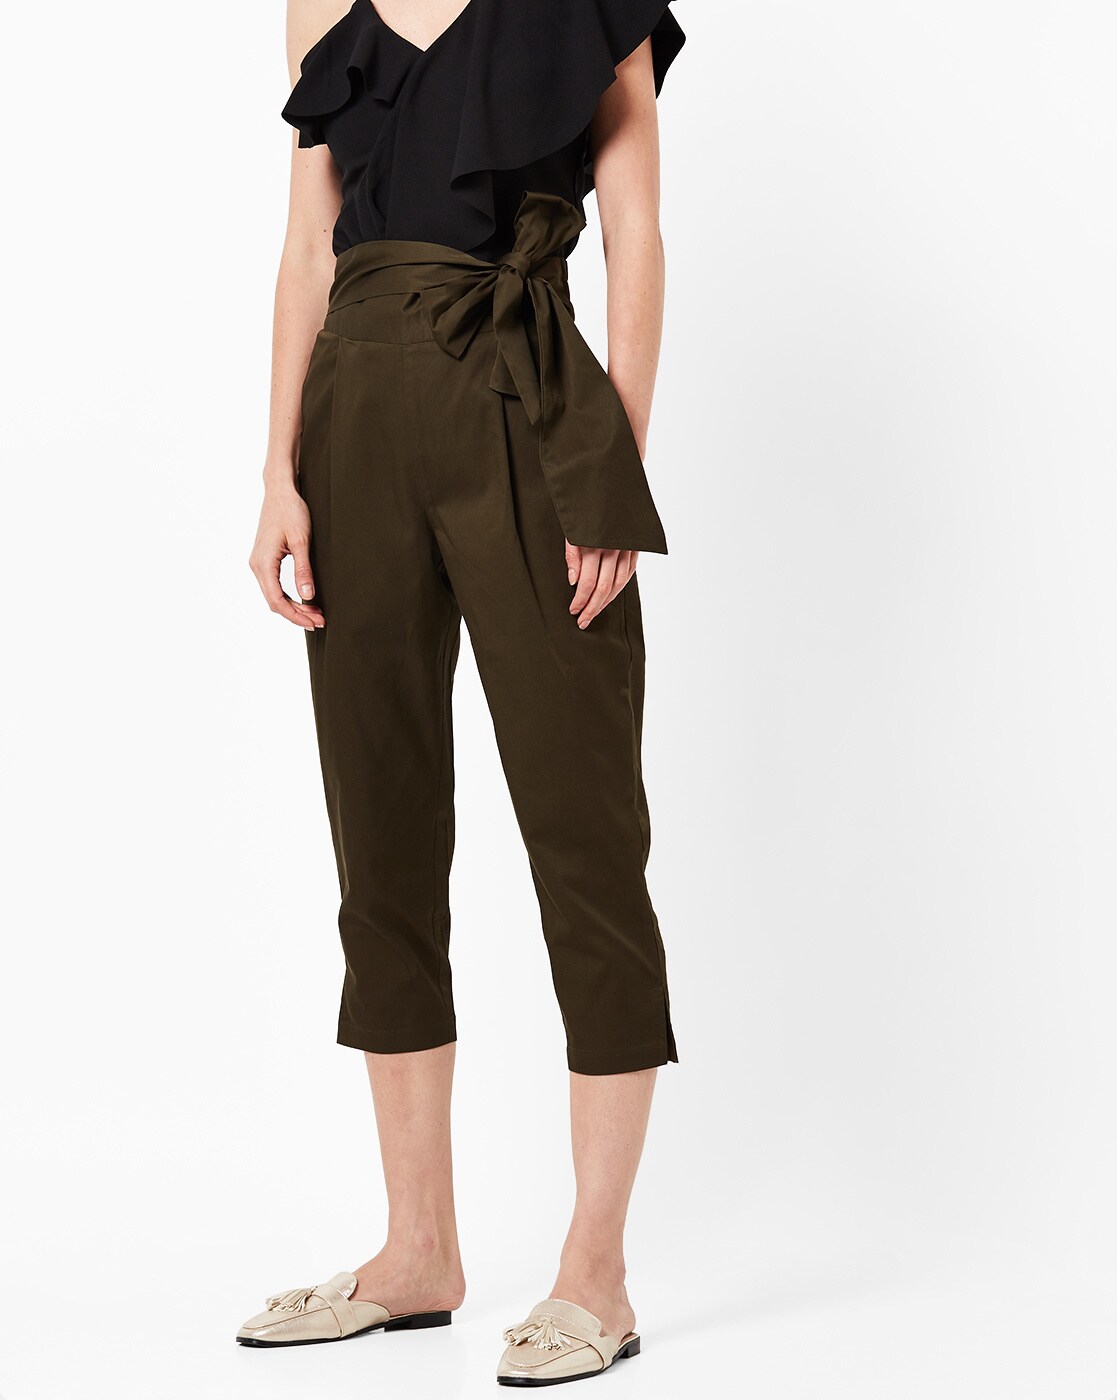 Bow pants and high waisted pants styling ideas  Just Trendy Girls